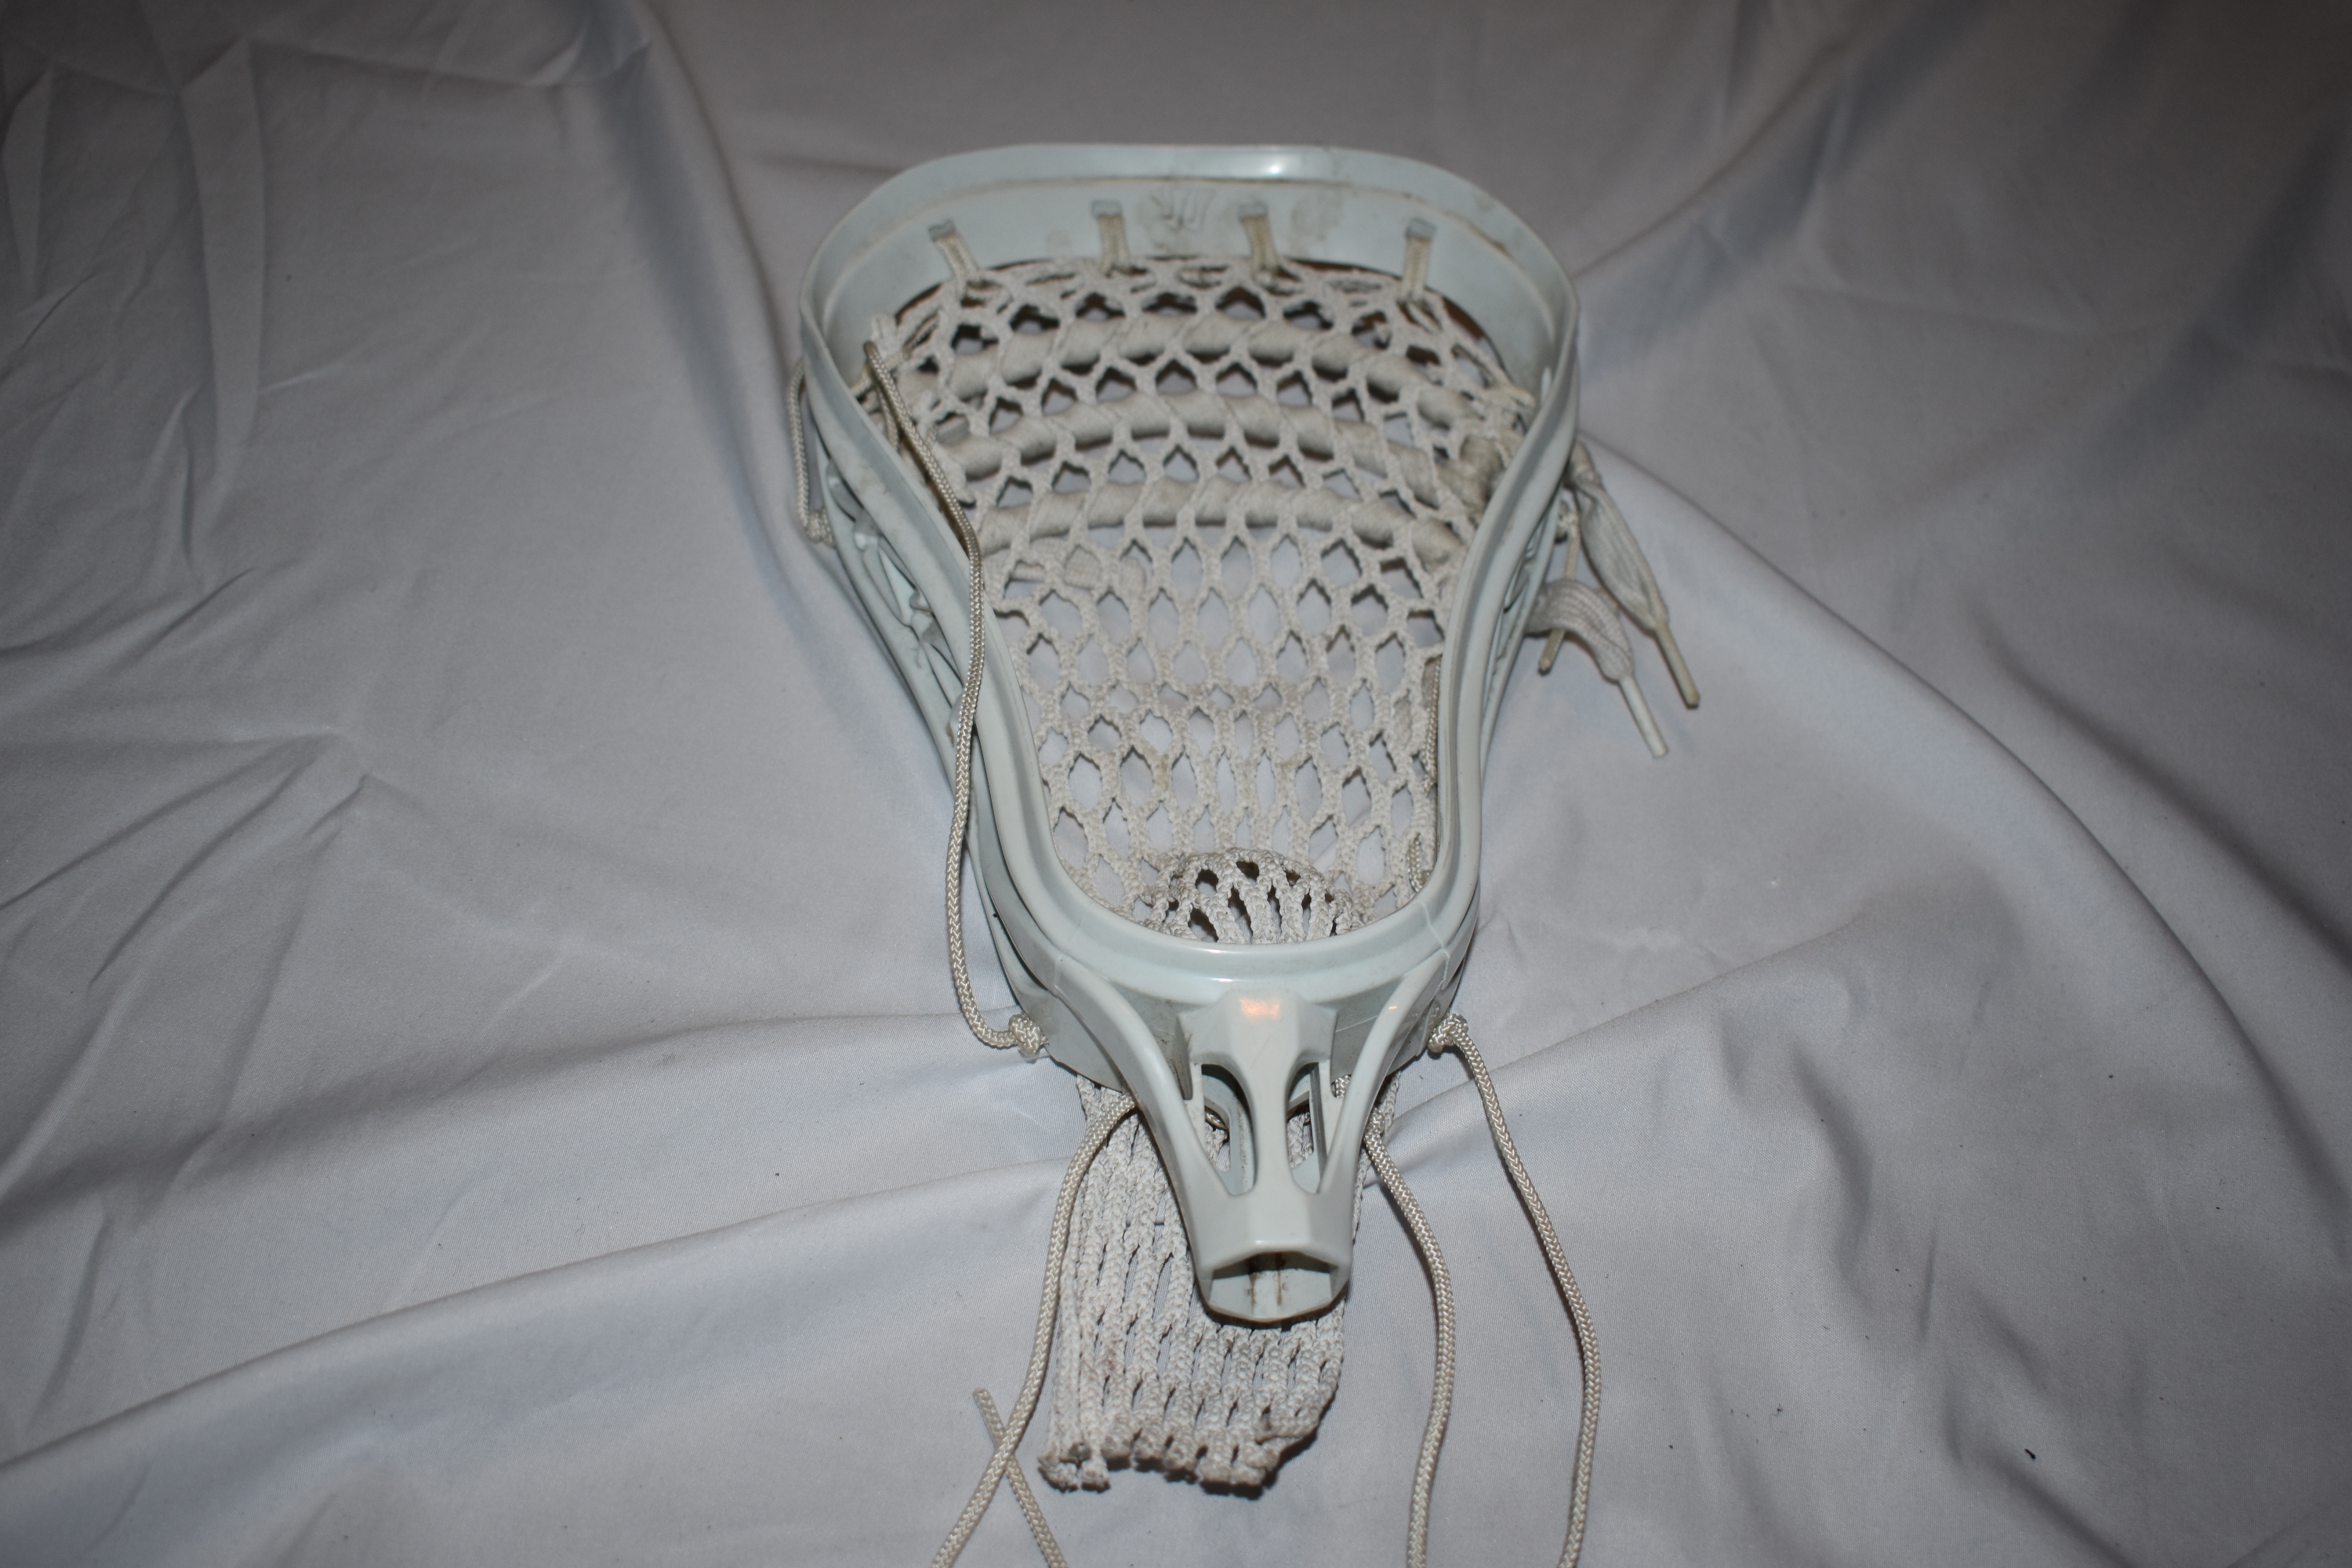 Warrior USA Strung Lacrosse Head - New Condition!